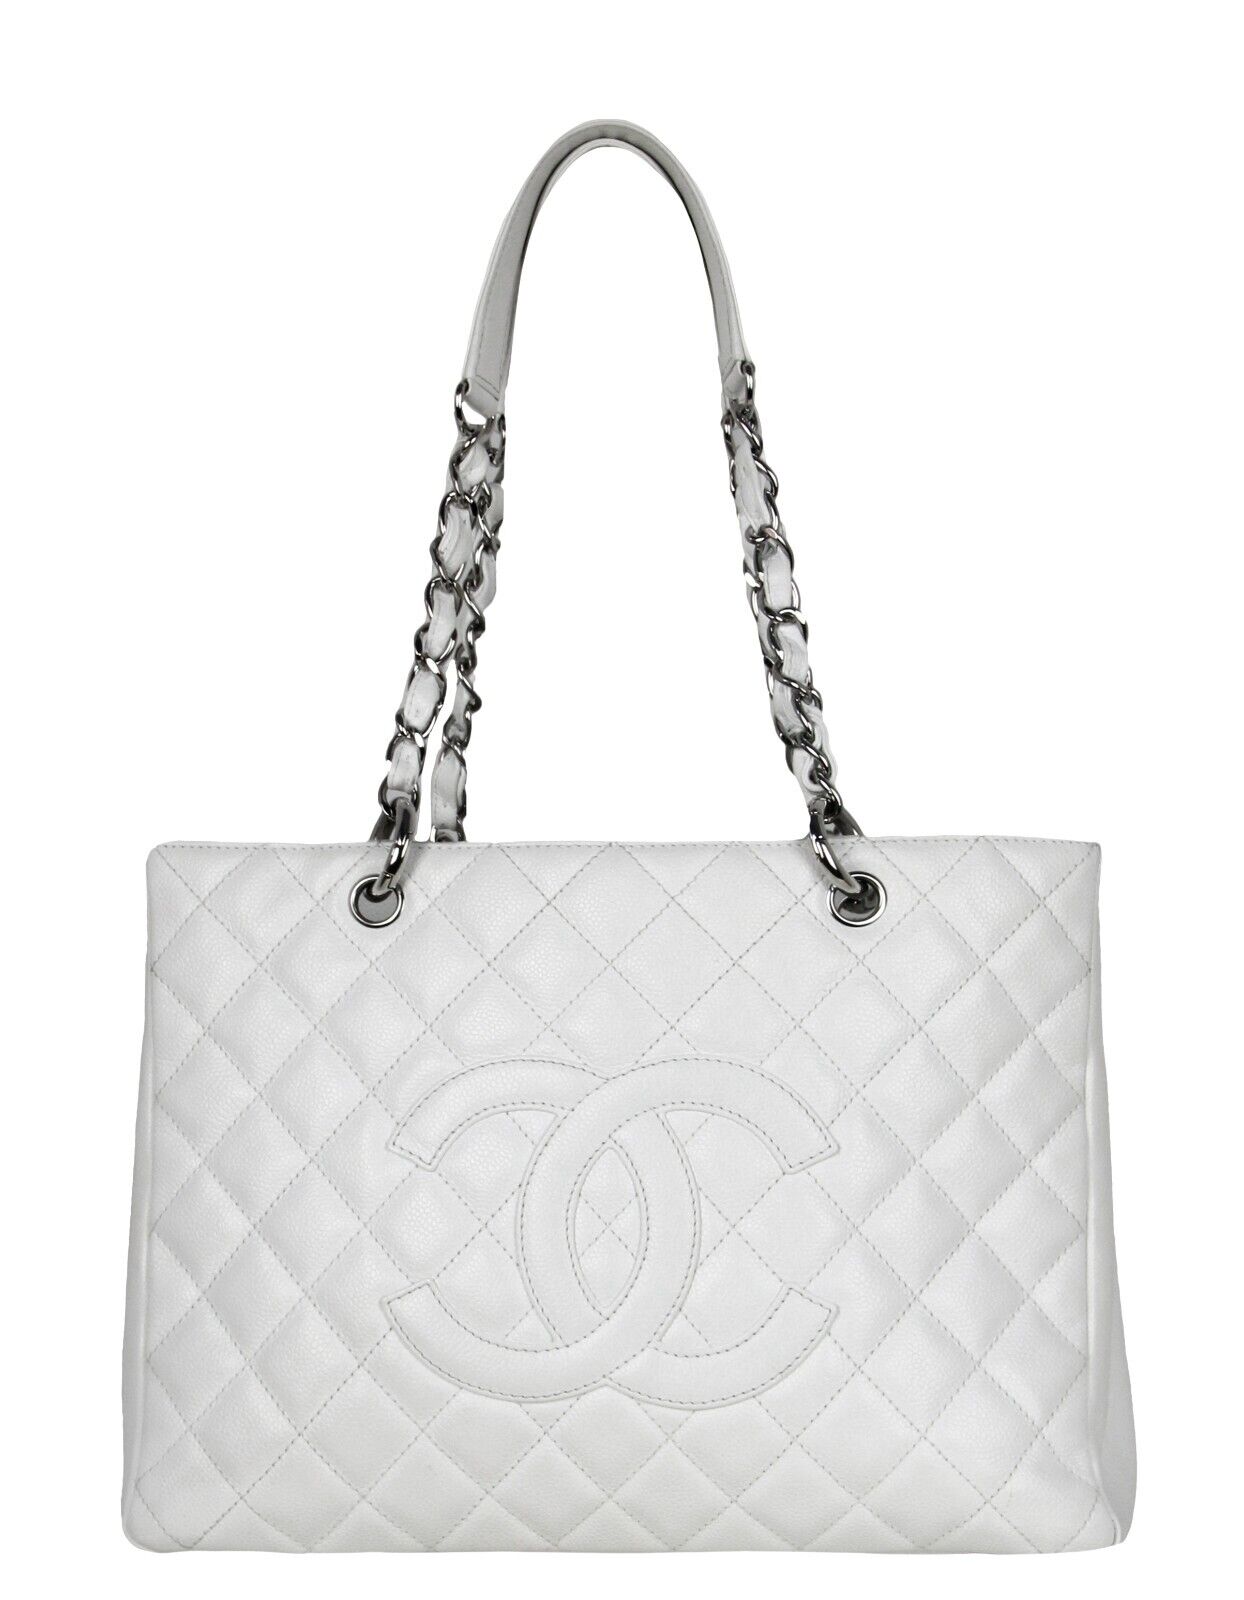 chanel white leather bags handbags